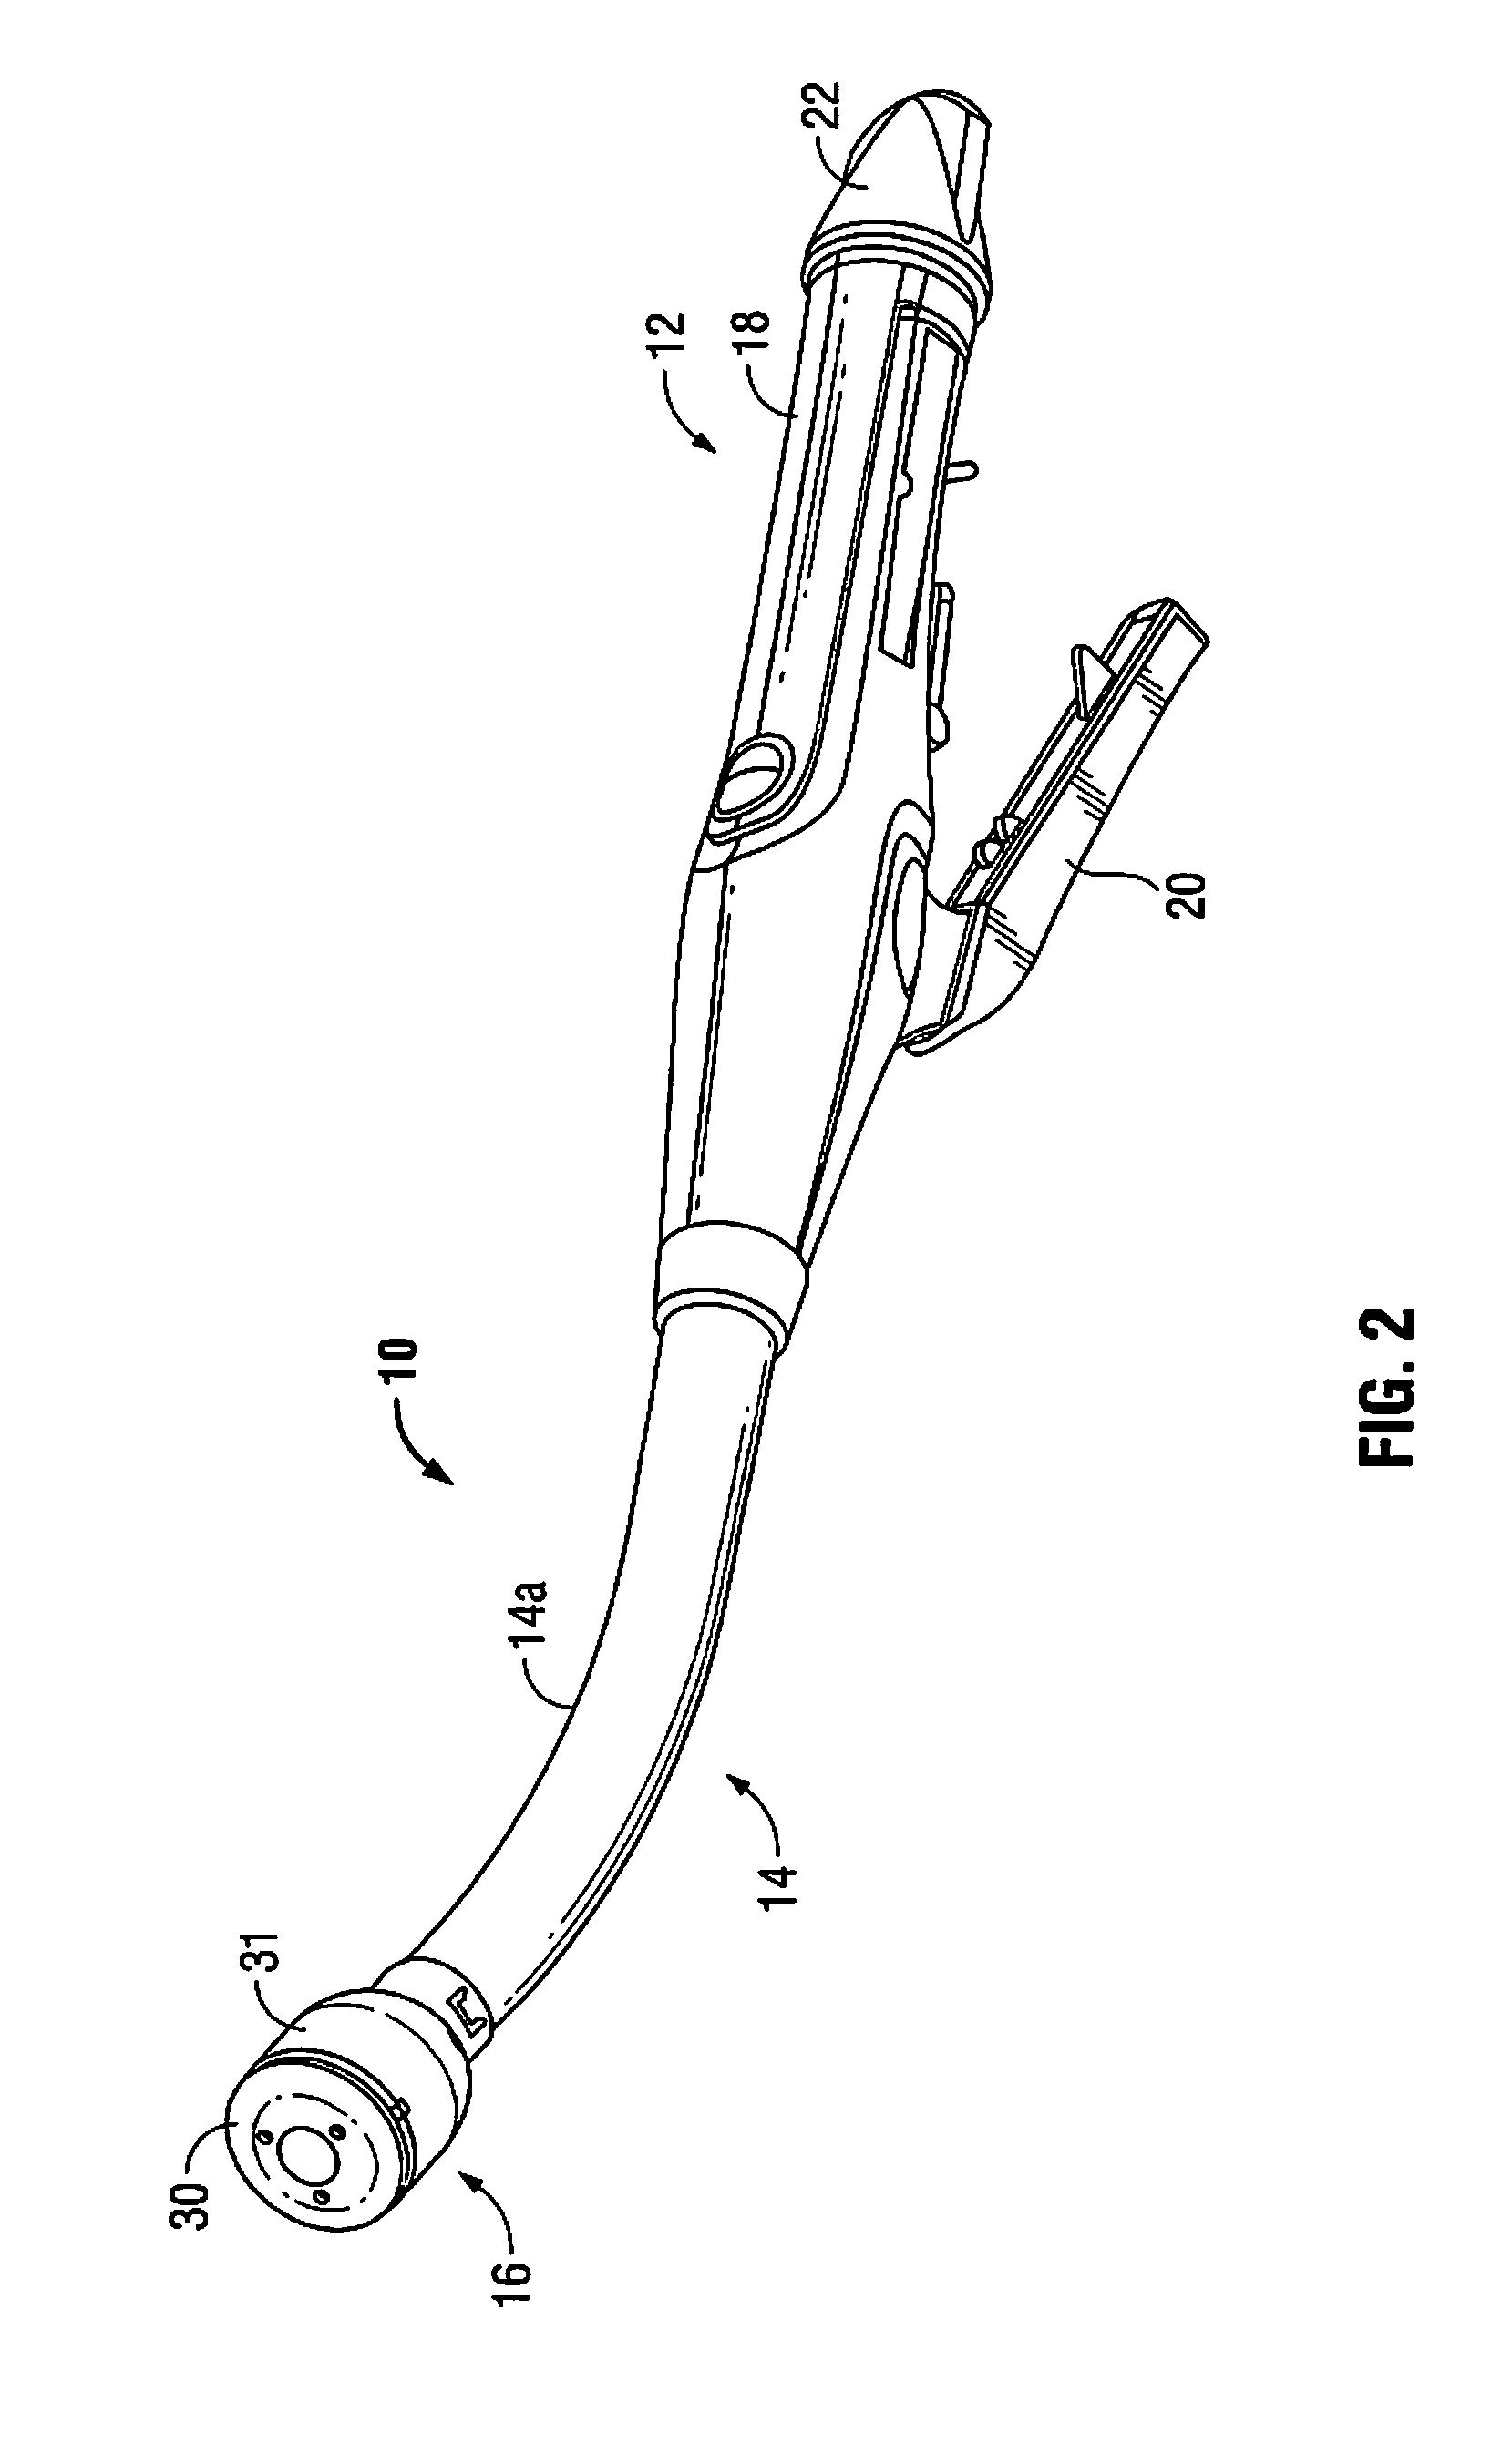 Surgical instrument with safety mechanism